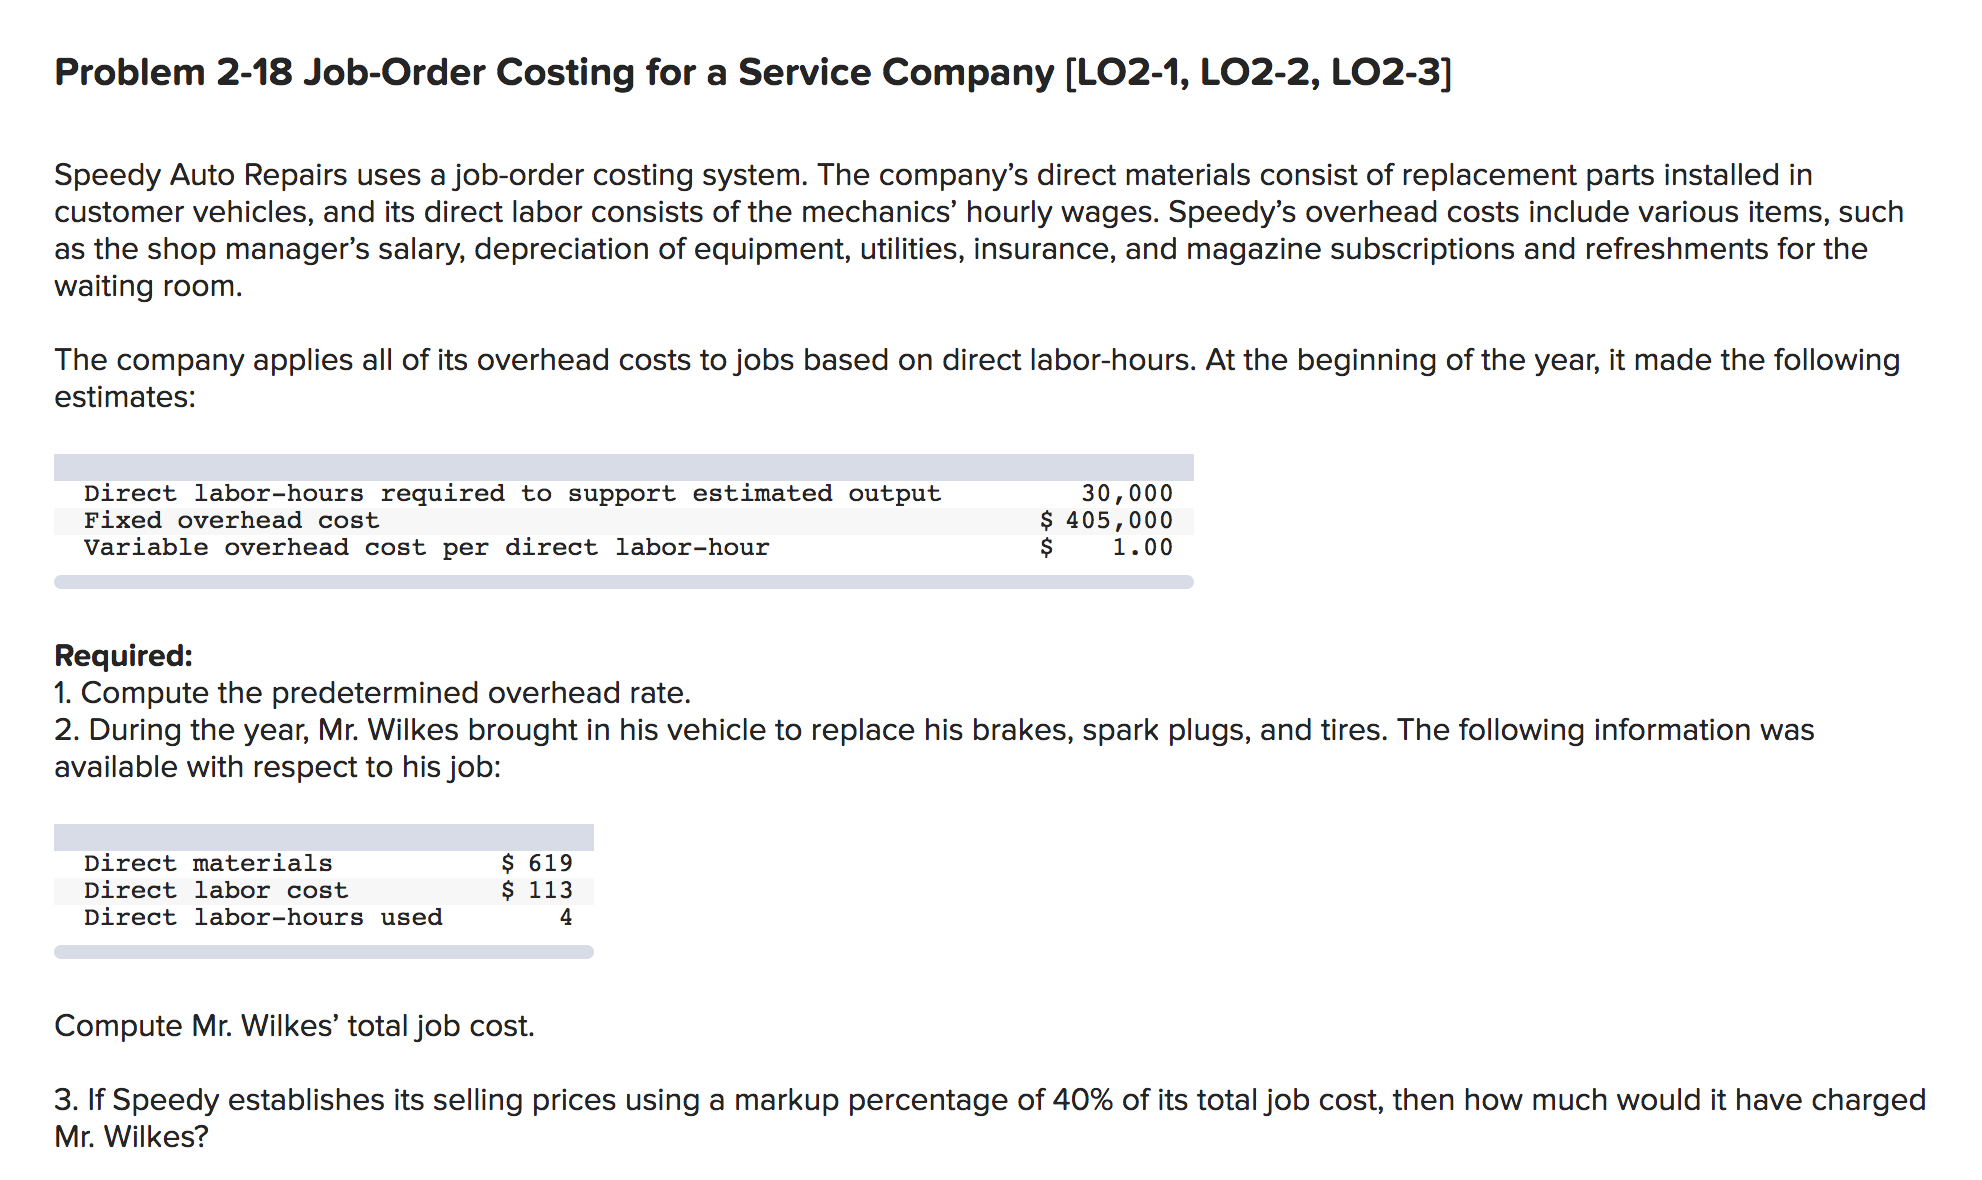 Problem 2-18 Job-Order Costing for a Service Company [LO2-1, LO2-2, LO2-3]
Speedy Auto Repairs uses a job-order costing system. The company's direct materials consist of replacement parts installed in
customer vehicles, and its direct labor consists of the mechanics' hourly wages. Speedy's overhead costs include various items, such
as the shop manager's salary, depreciation of equipment, utilities, insurance, and magazine subscriptions and refreshments for the
waiting room.
The company applies all of its overhead costs to jobs based on direct labor-hours. At the beginning of the year, it made the following
estimates:
30,000
$ 405,000
1.00
Direct labor-hours required to support estimated output
Fixed overhead cost
Variable overhead cost per direct labor-hour
Required:
1. Compute the predetermined overhead rate.
2. During the year, Mr. Wilkes brought in his vehicle to replace his brakes, spark plugs, and tires. The following information was
available with respect to his job:
$ 619
$ 113
Direct materials
Direct labor cost
Direct labor-hours used
4
Compute Mr. Wilkes' total job cost.
3. If Speedy establishes its selling prices using a markup percentage of 40% of its total job cost, then how much would it have charged
Mr. Wilkes?
